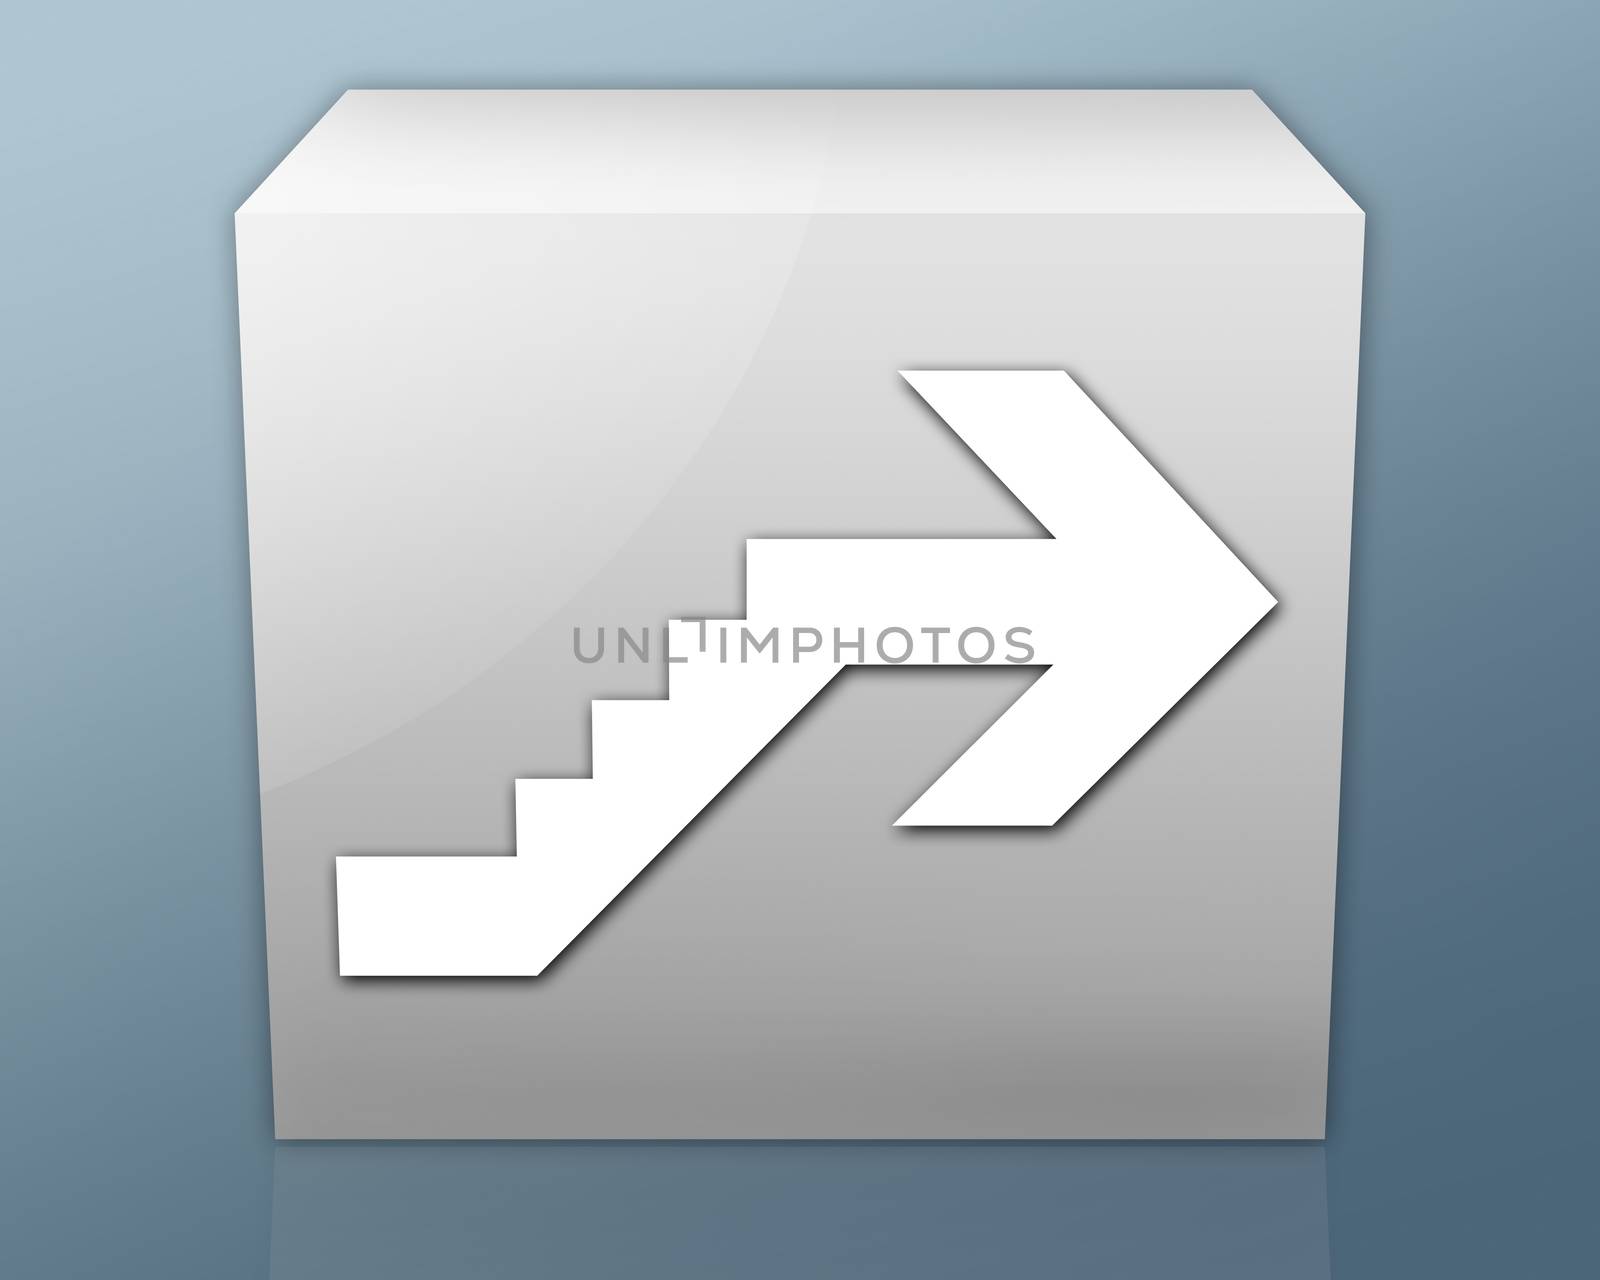 Icon, Button, Pictogram Upstairs by mindscanner